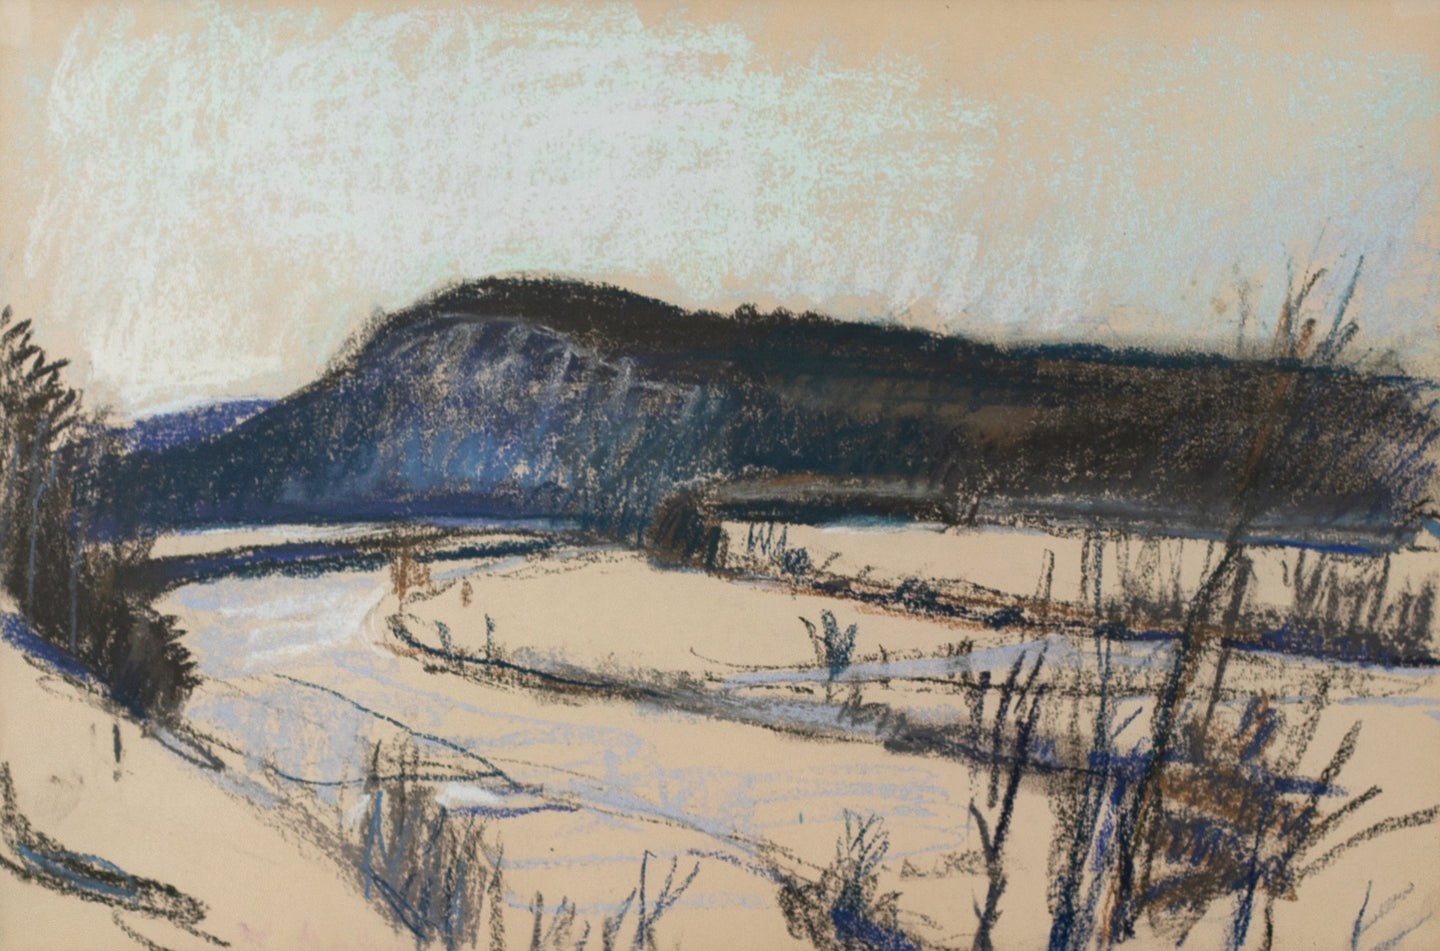 Wolf Kahn (1927-2020) Study for Winter, 1984  Pastel on paper  12 x 18 inches (unframed). This winter landscape is unusual because Kahn rarely spent winters in Vermont, so he painted very few winter landscapes. Available  at Manolis Projects Gallery